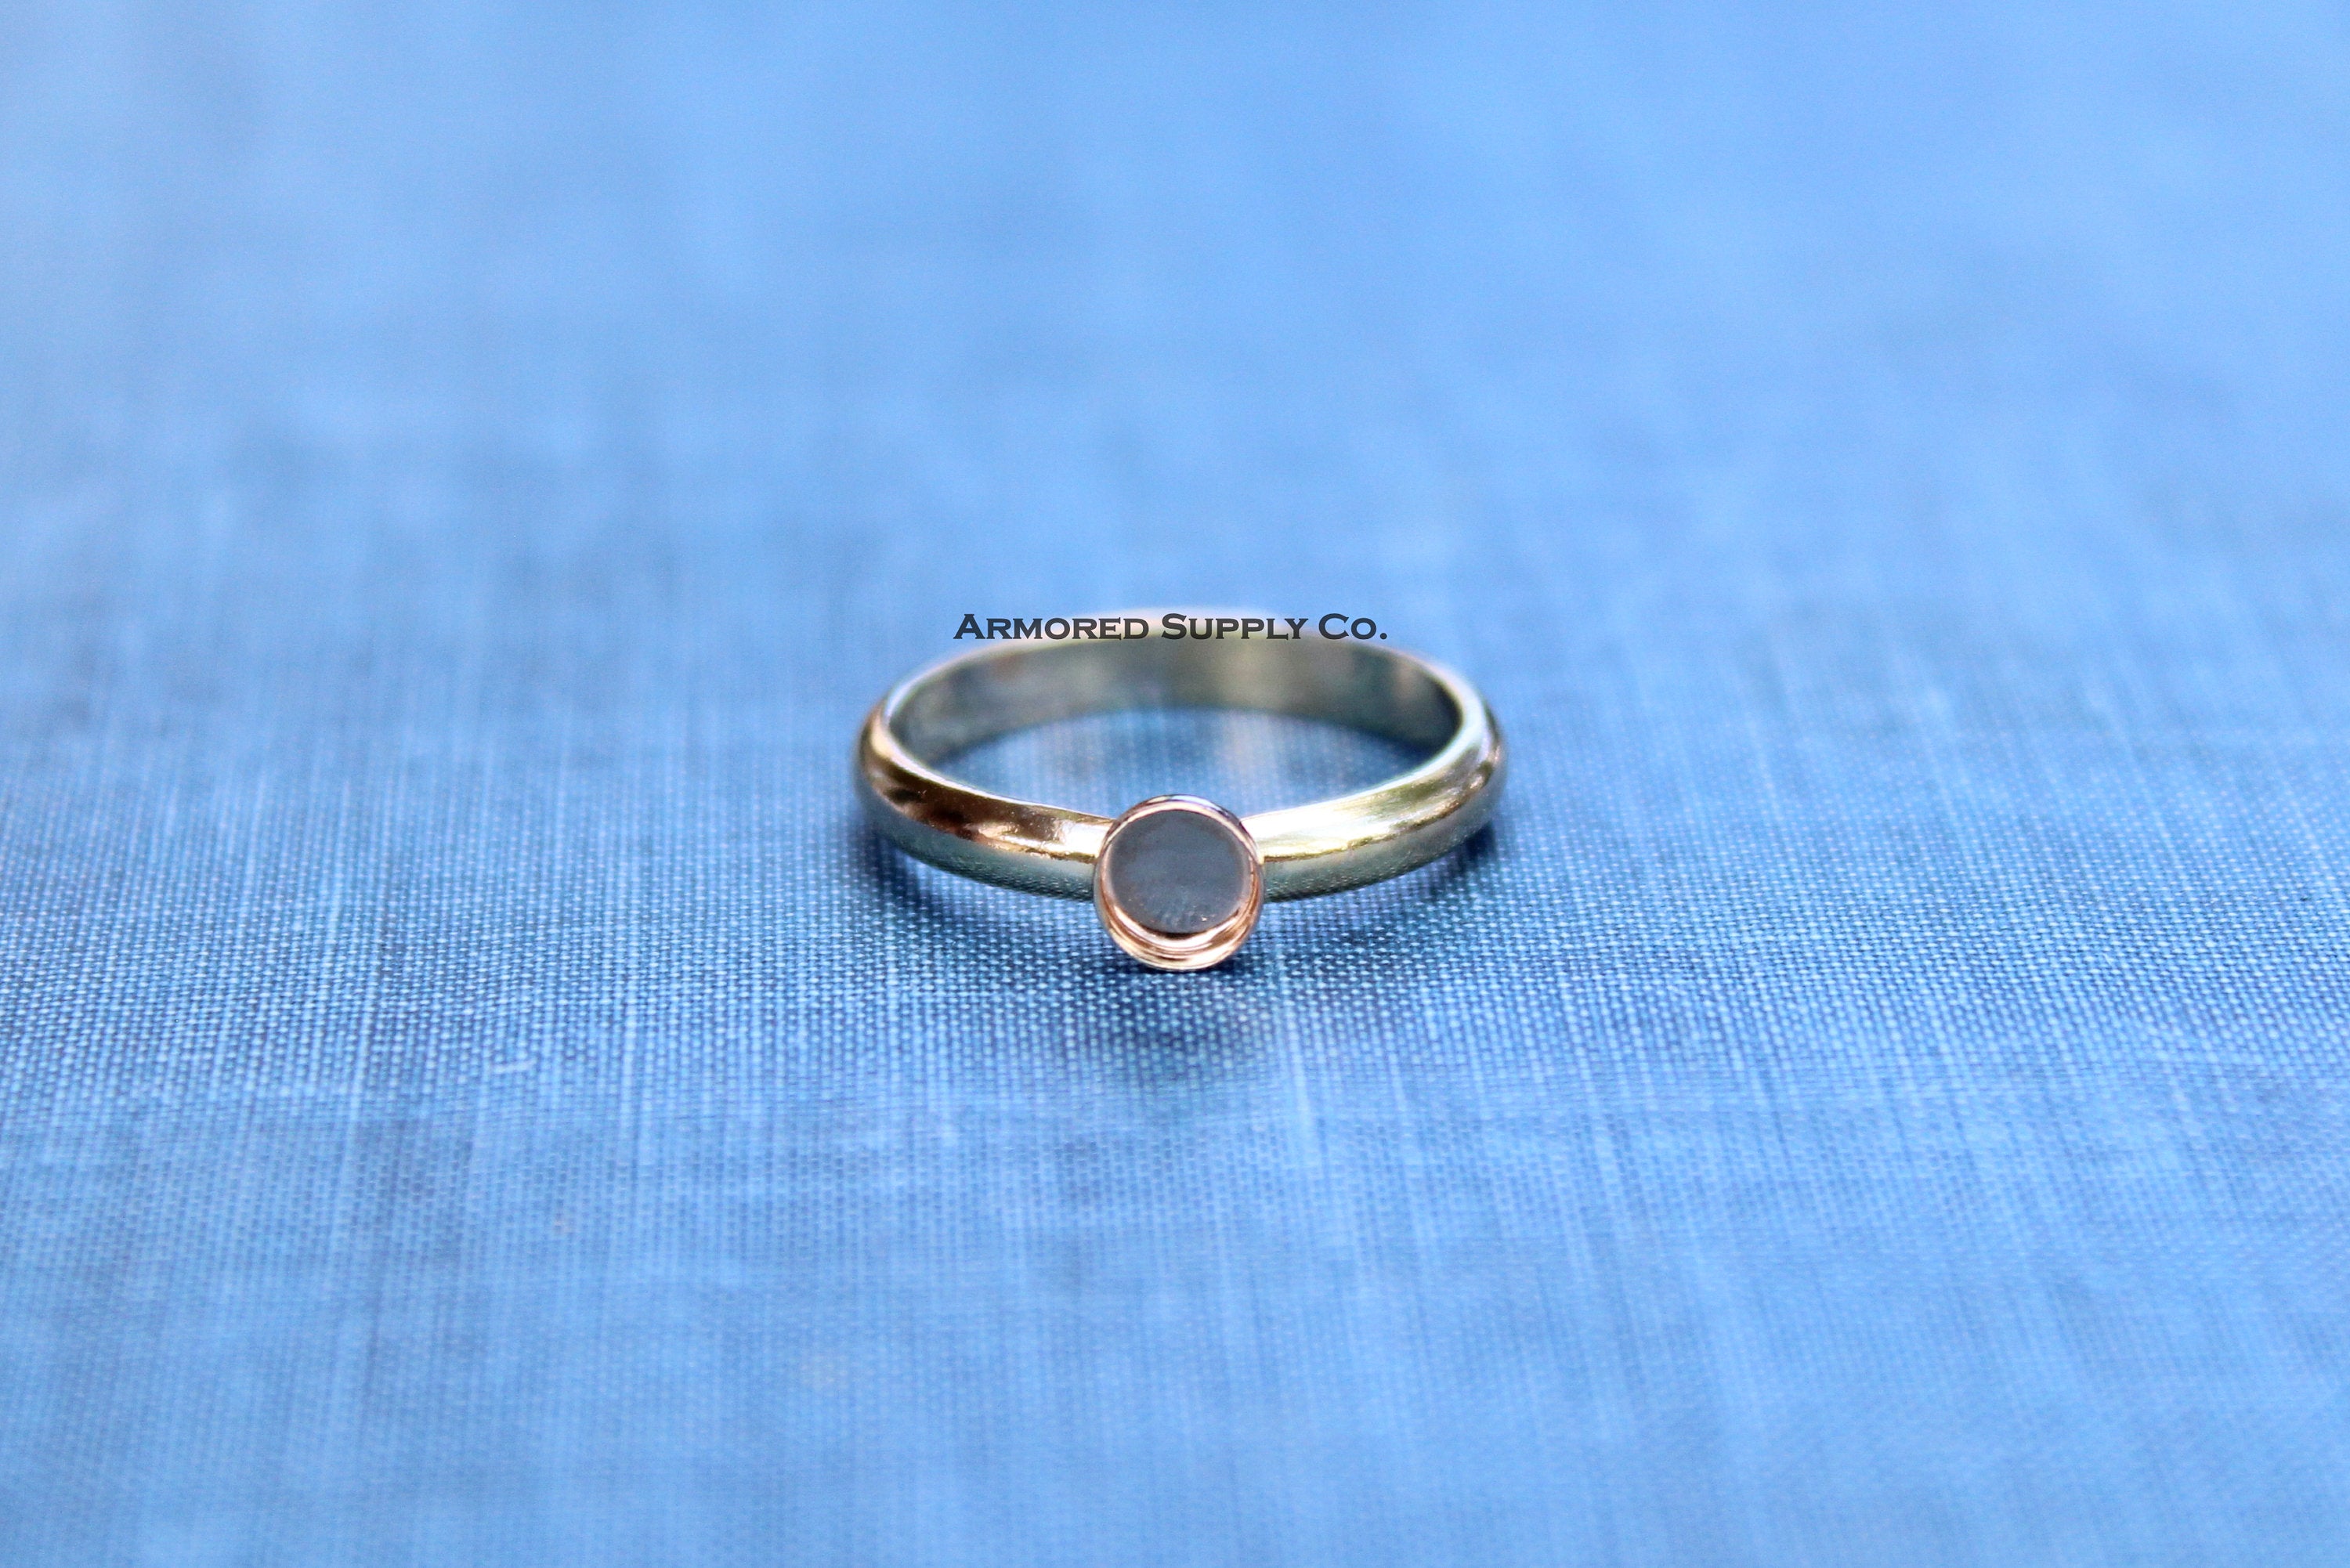 Gold Filled 6mm Bezel Cup Ring blank, Half Round Ring Band, Breast Milk DIY ring, DIY jewelry supplies, wholesale jewelry, diy ring blank